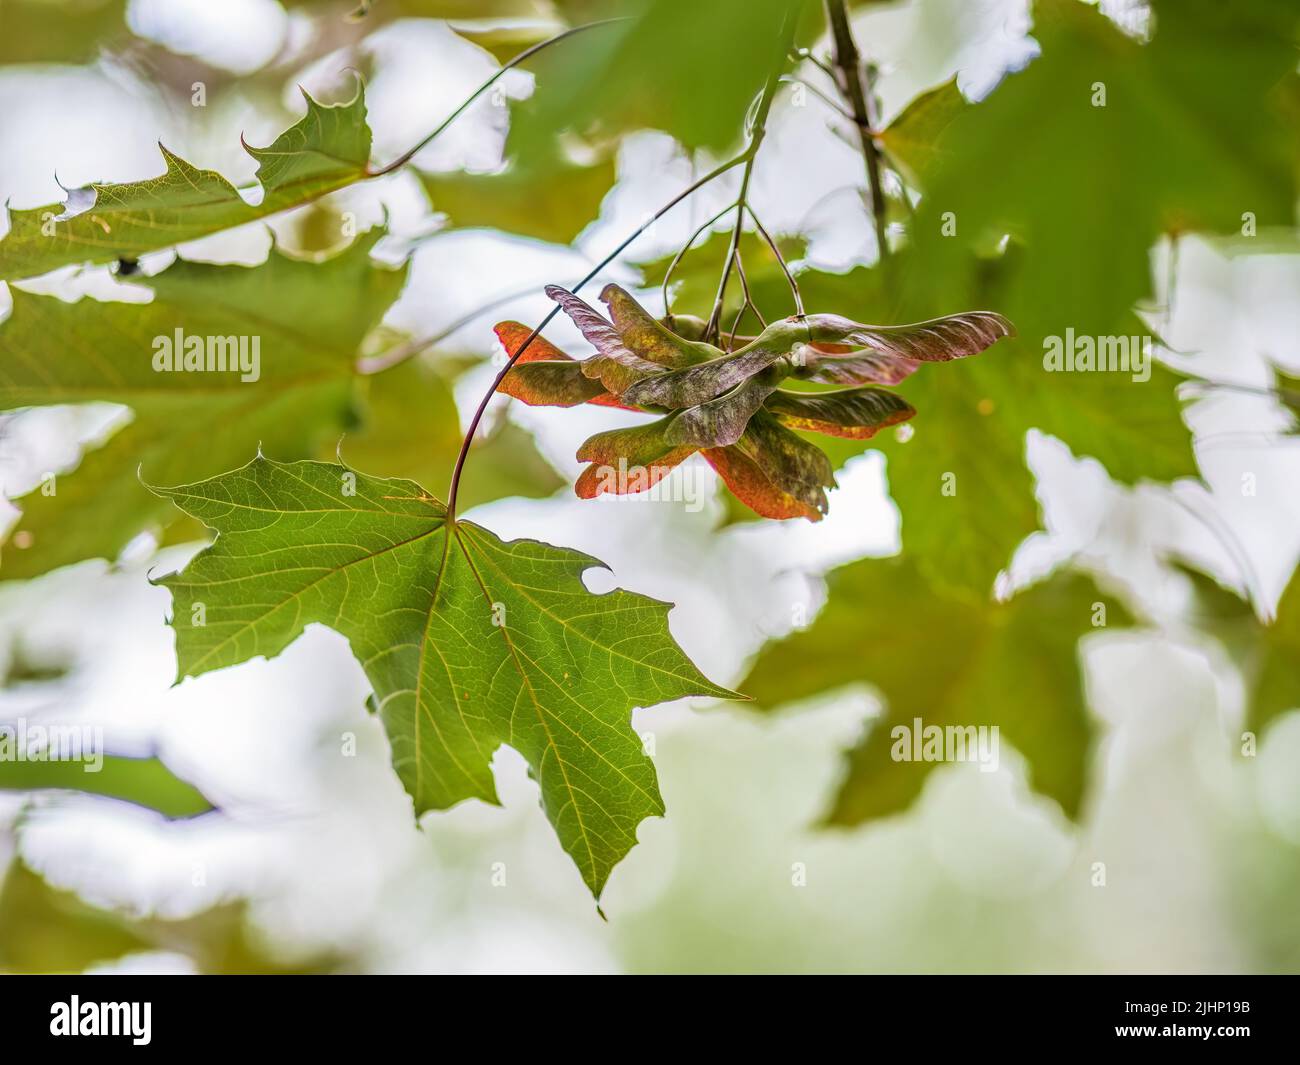 Summer branches of maple tree with green leaves and seeds. Summer background with copy space. Close-up of maple seeds, disamaras Stock Photo